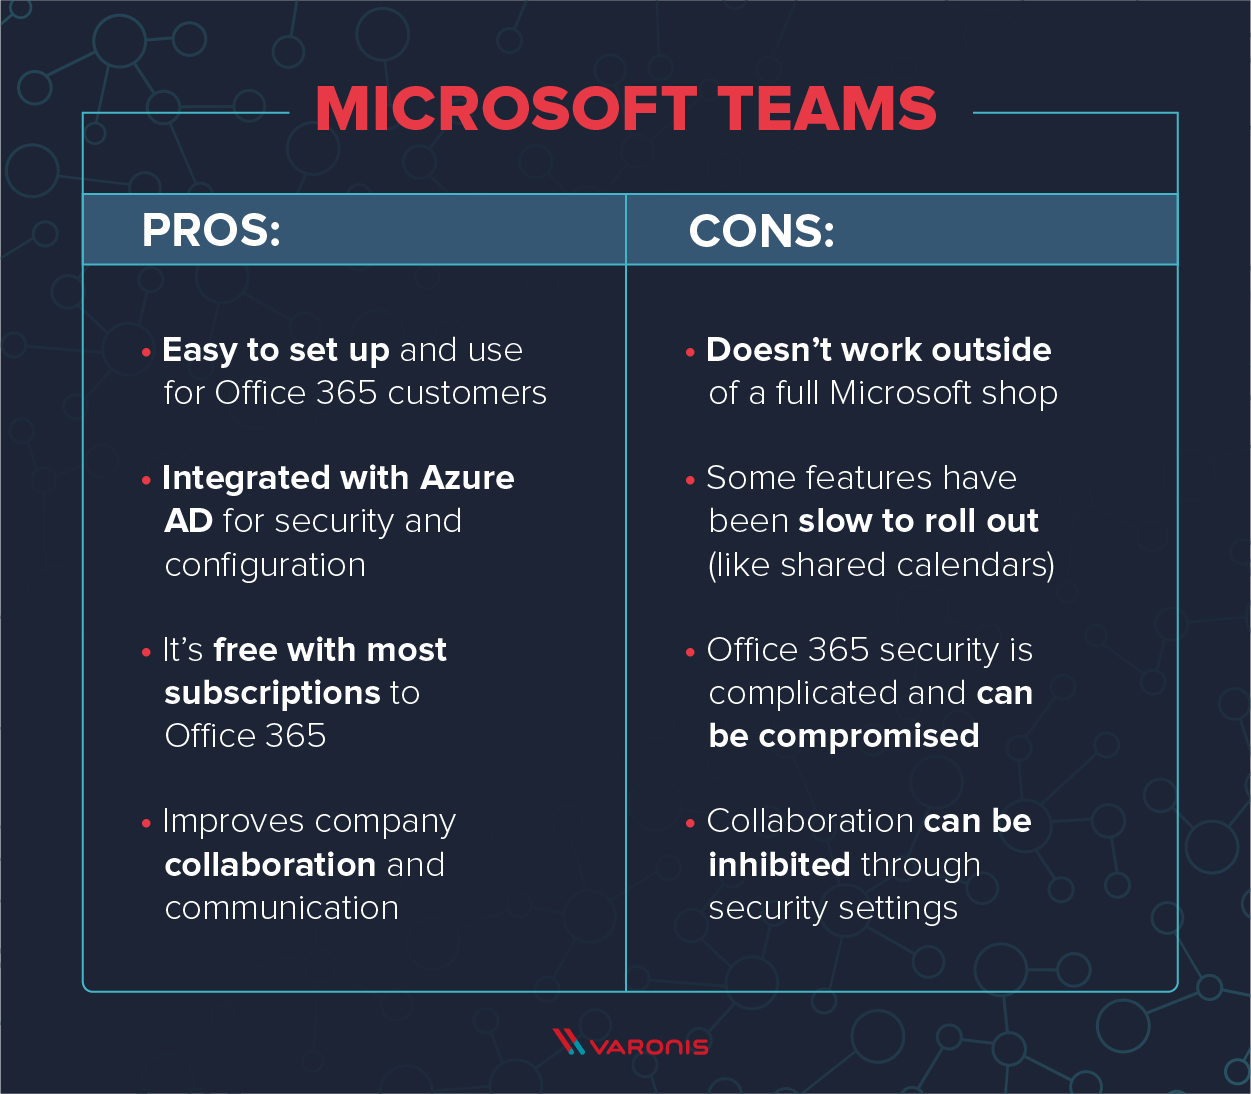 A pros and cons list of microsoft teams